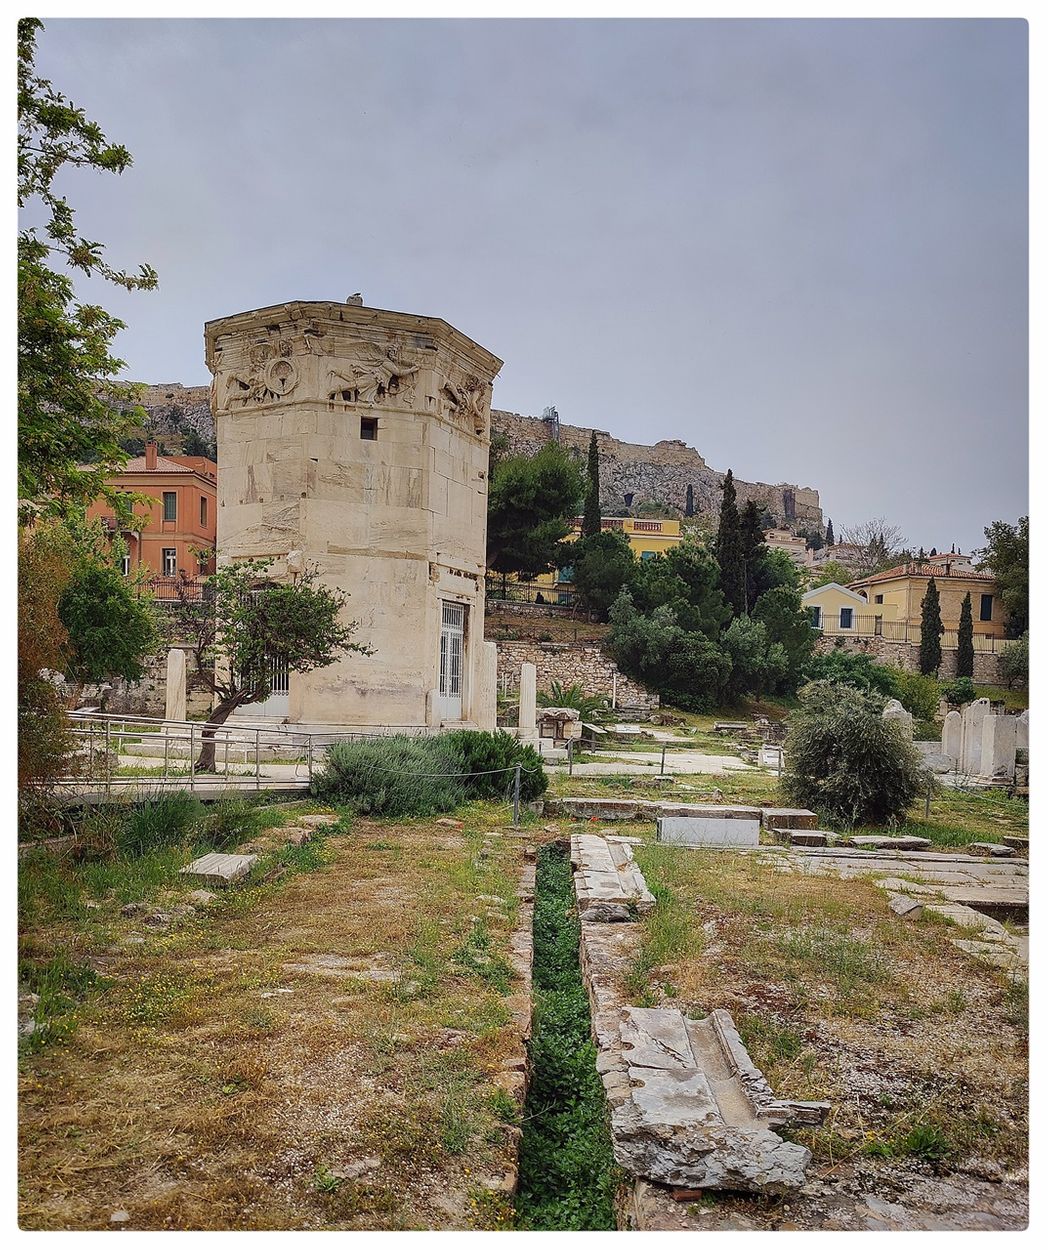 The public latrines (Vespasianae) can be seen in the foreground.  The Tower of the Winds stands behide them, and the Acropolis can be seen at the background.